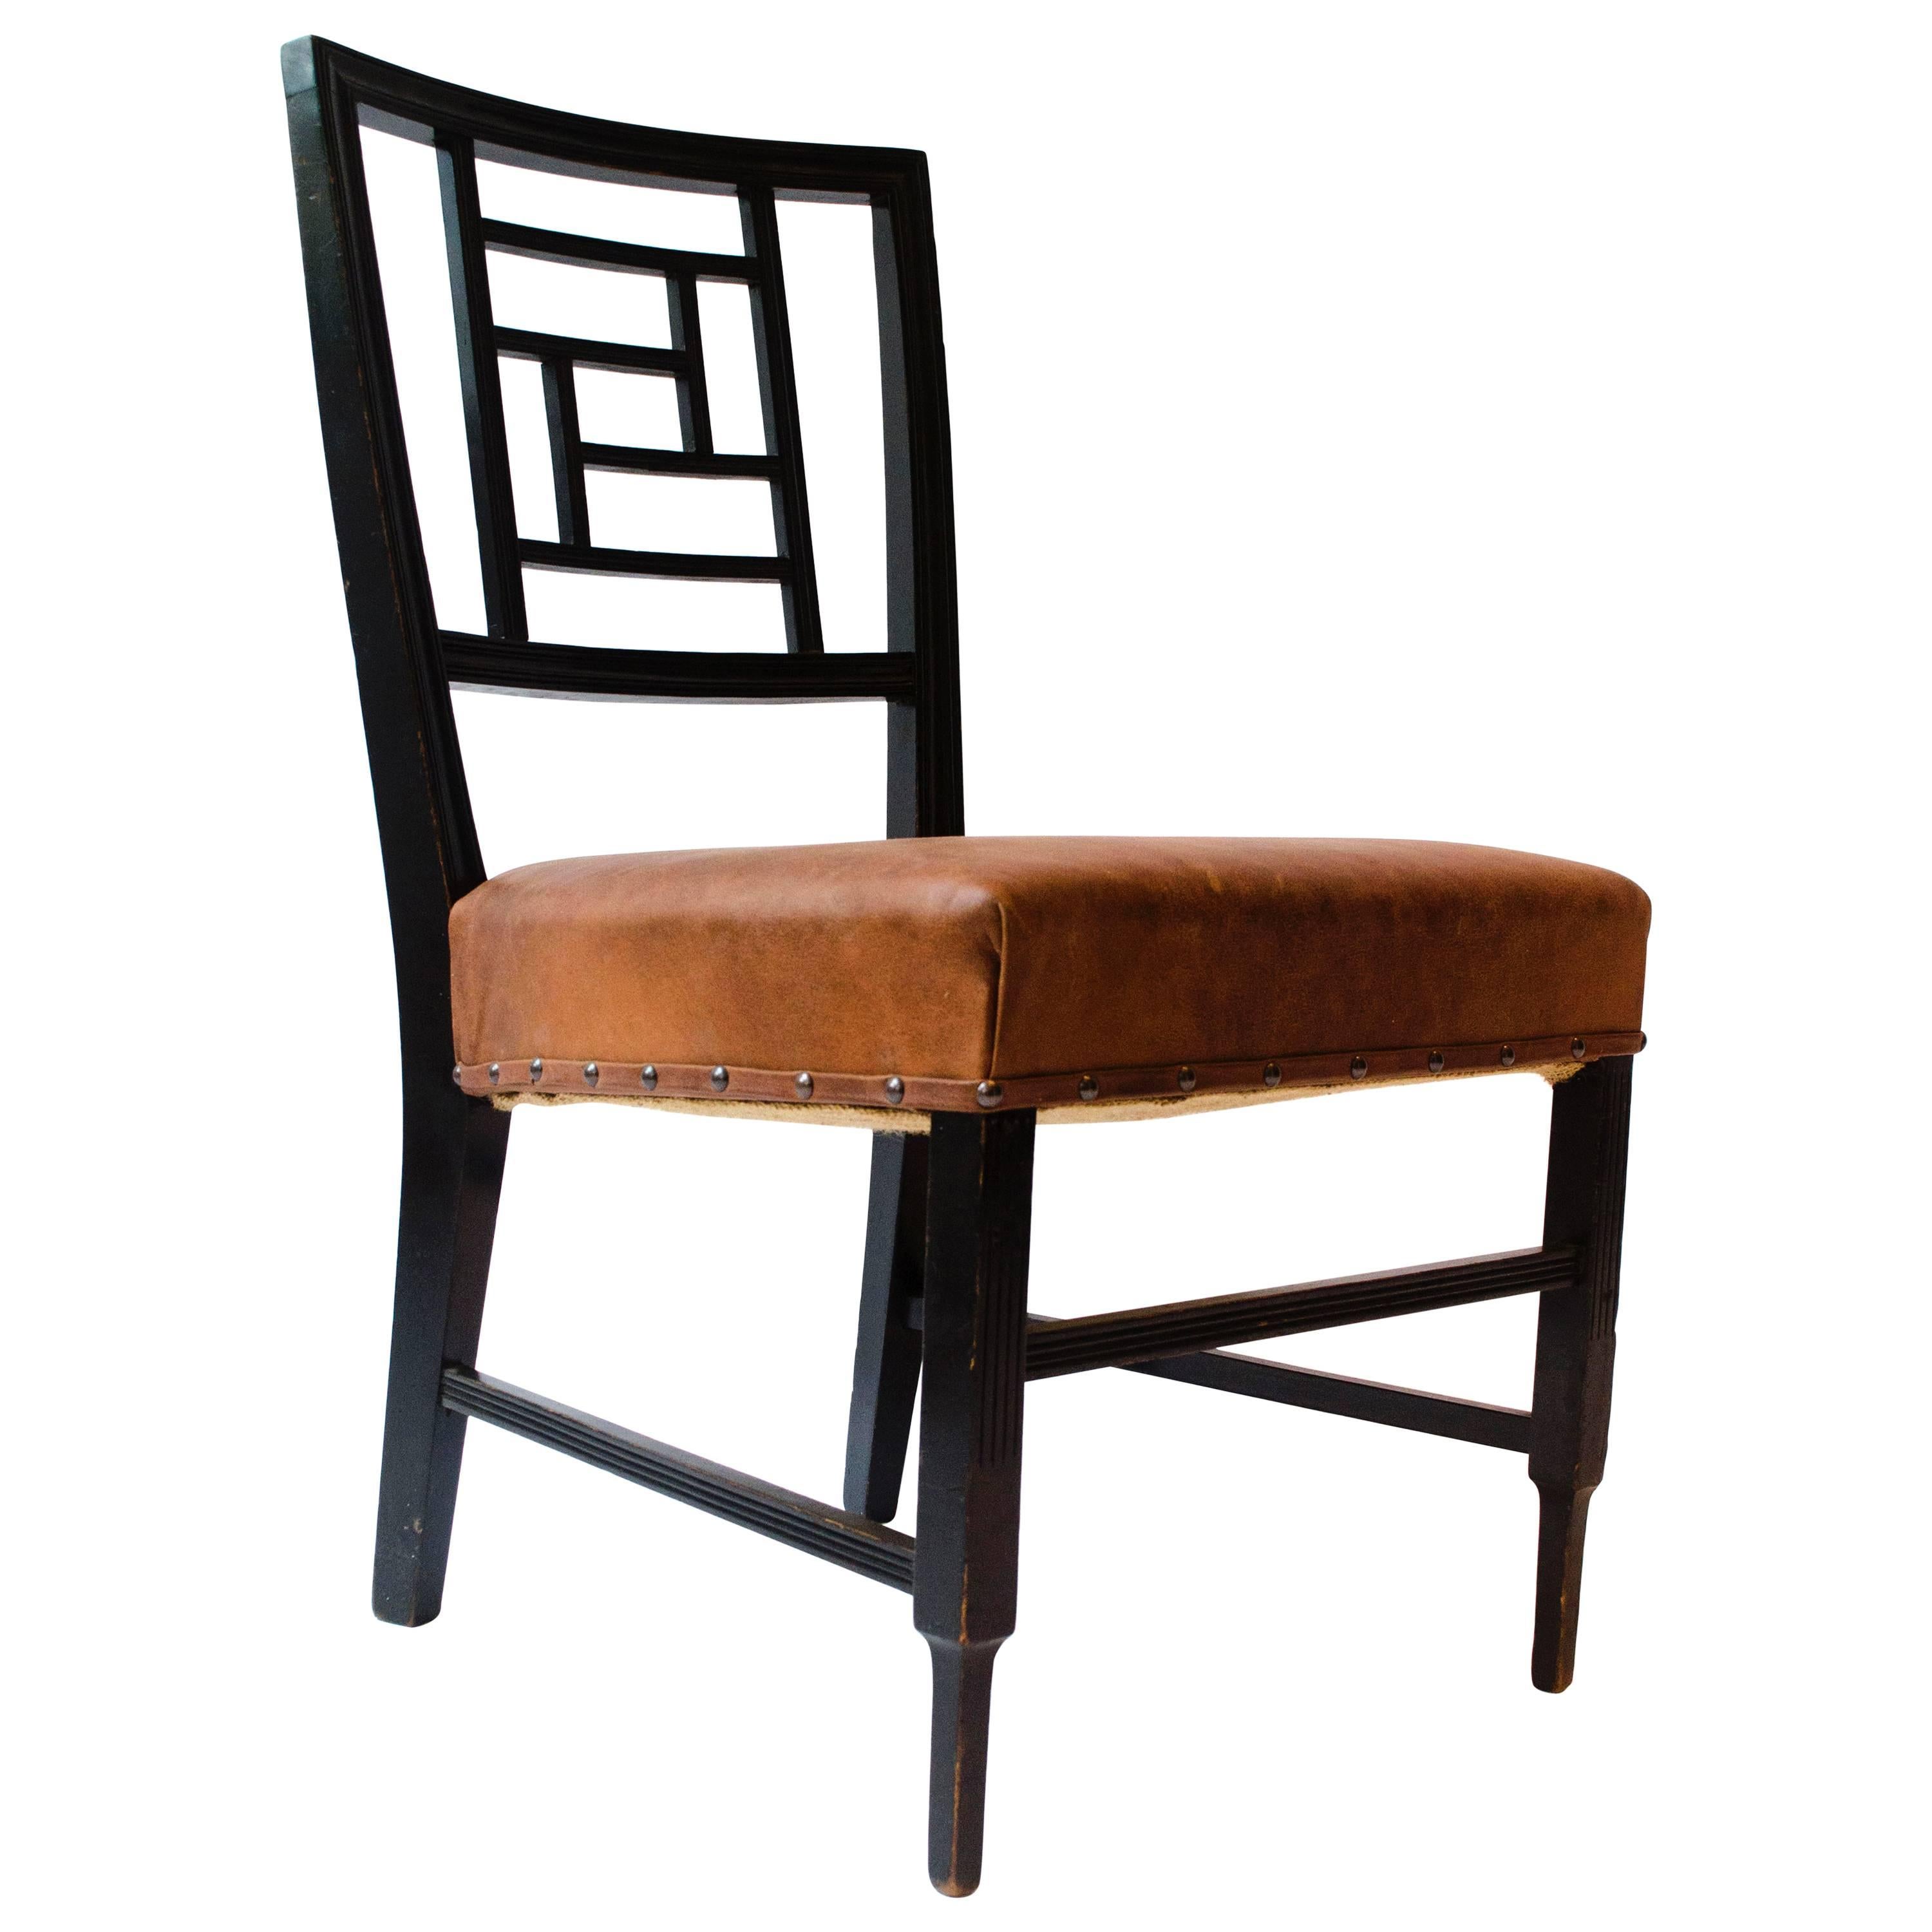 E W Godwin. An Anglo-Japanese Ebonized Side Chair Probably Made by William Watt For Sale